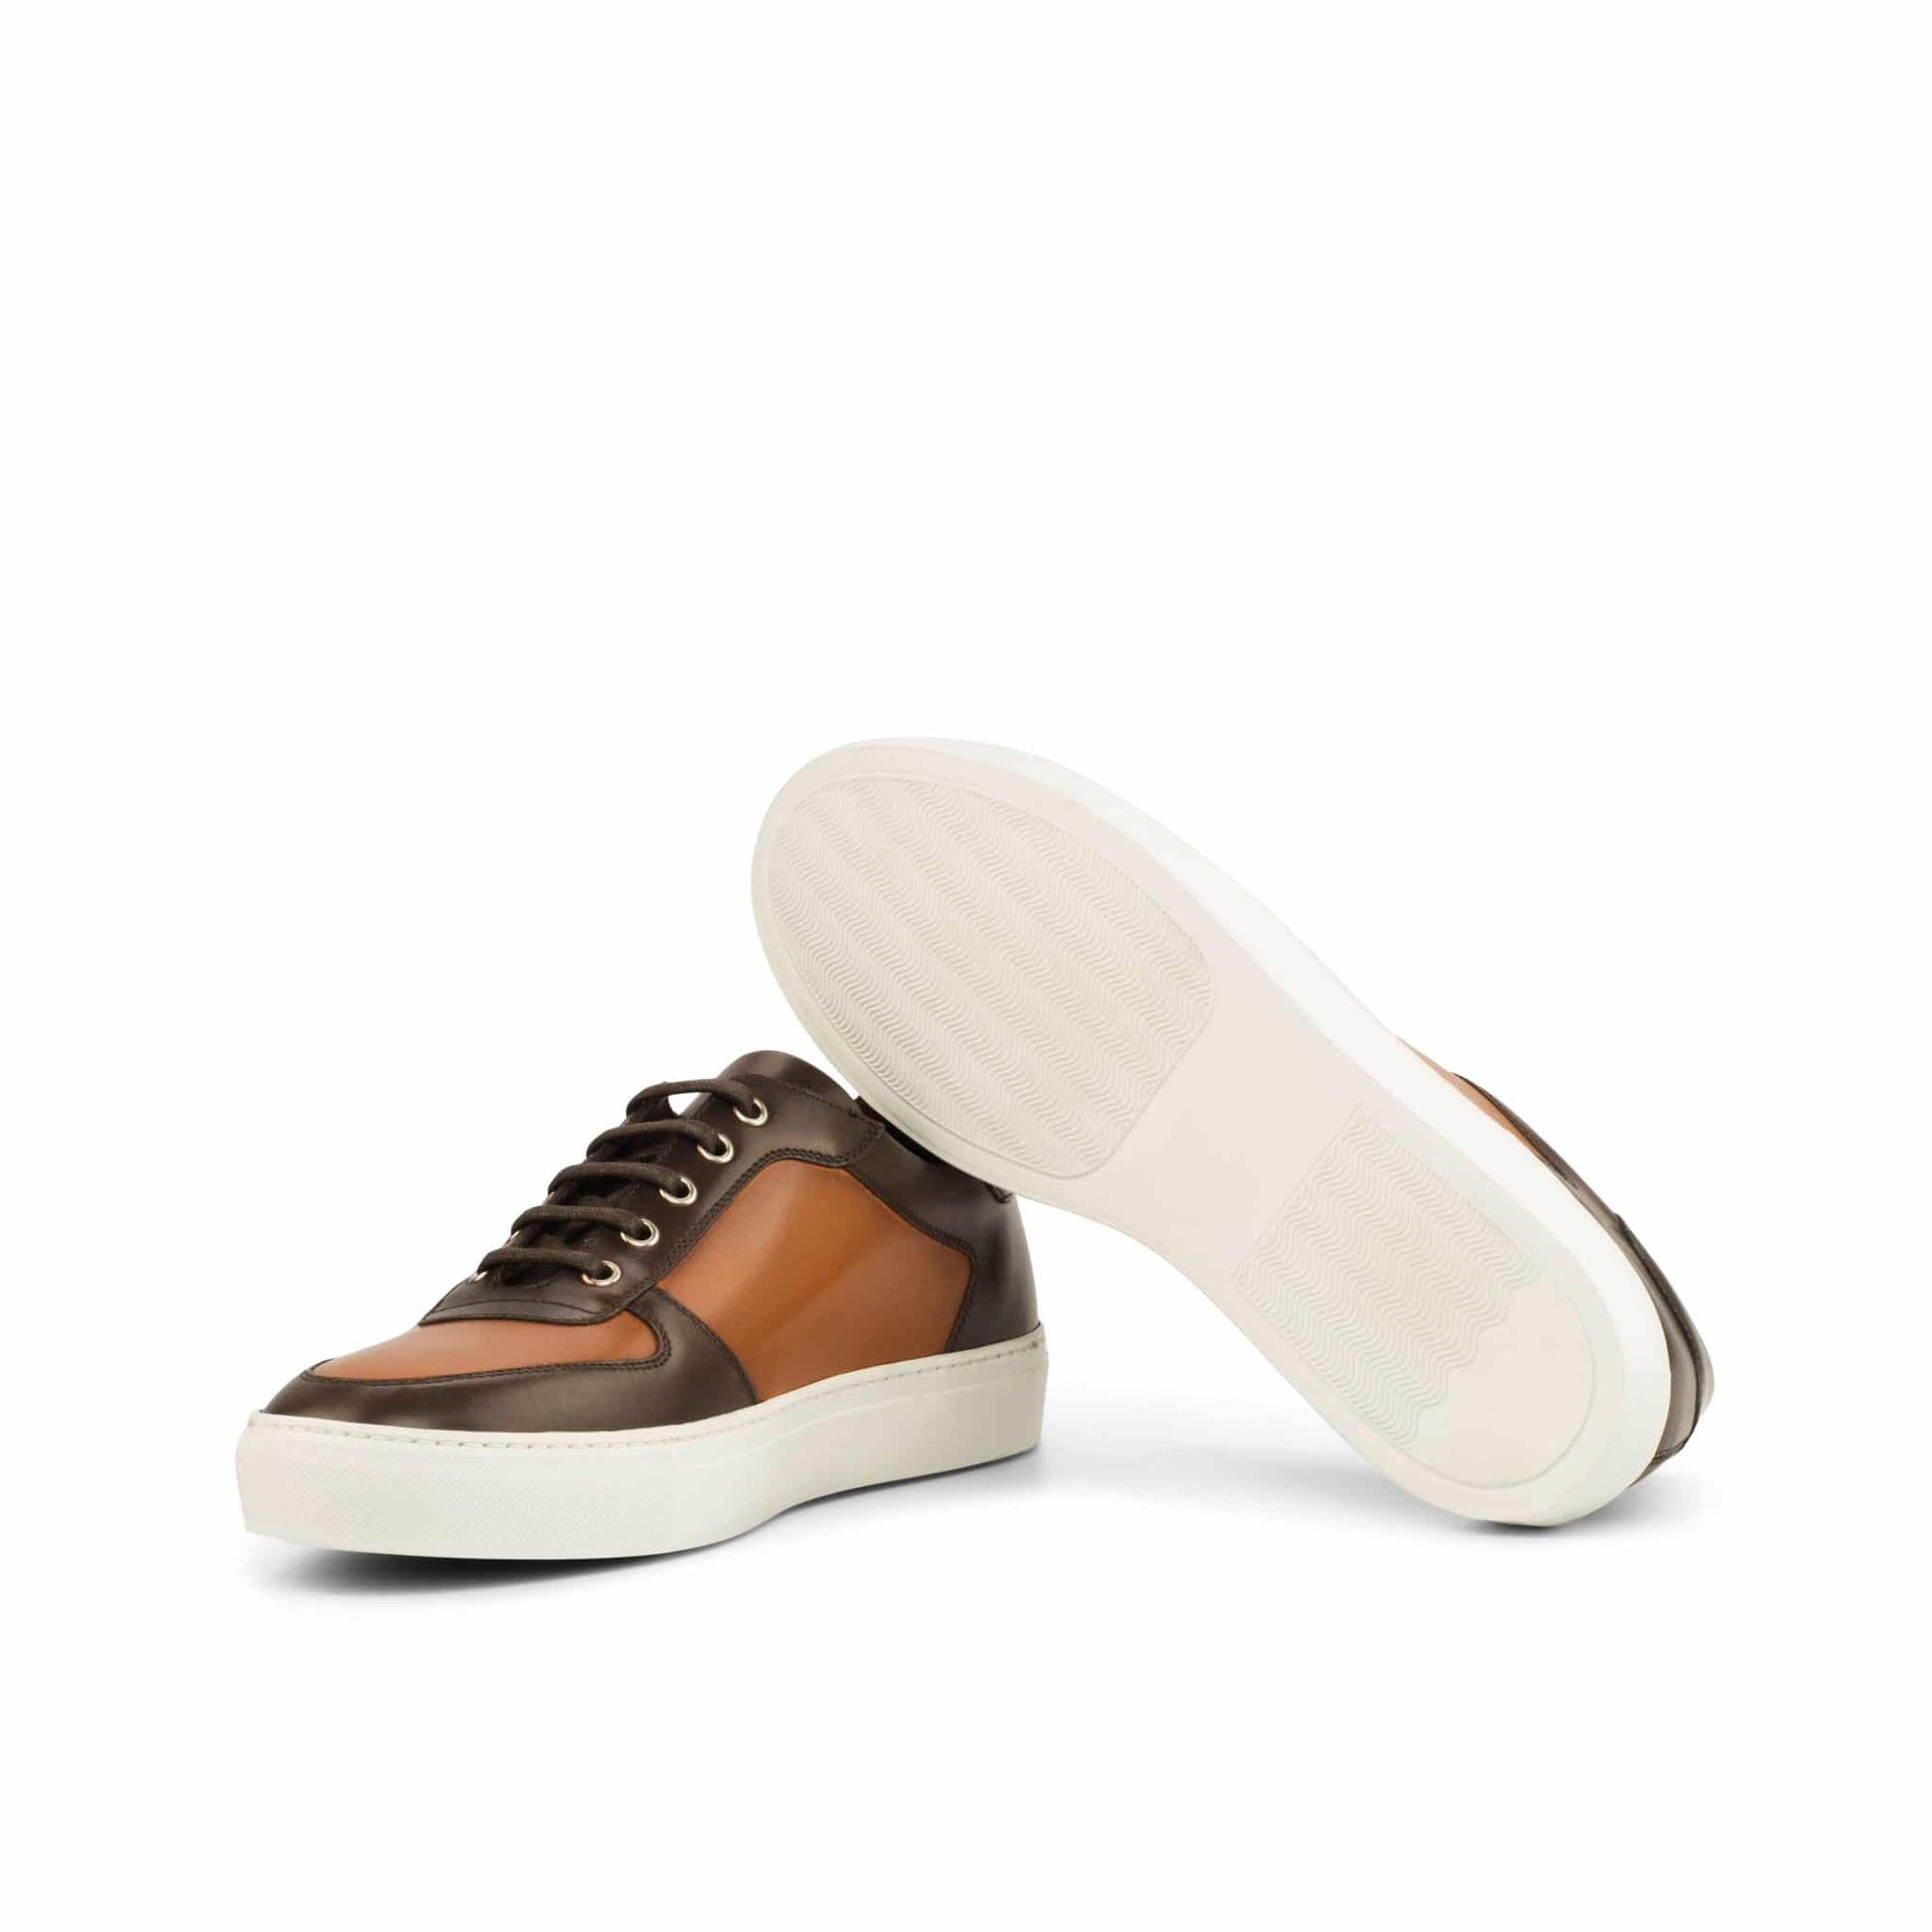 Tan and Brown Leather Low Top Lace Up Sneaker for Men. White Comfortable Cup Sole.